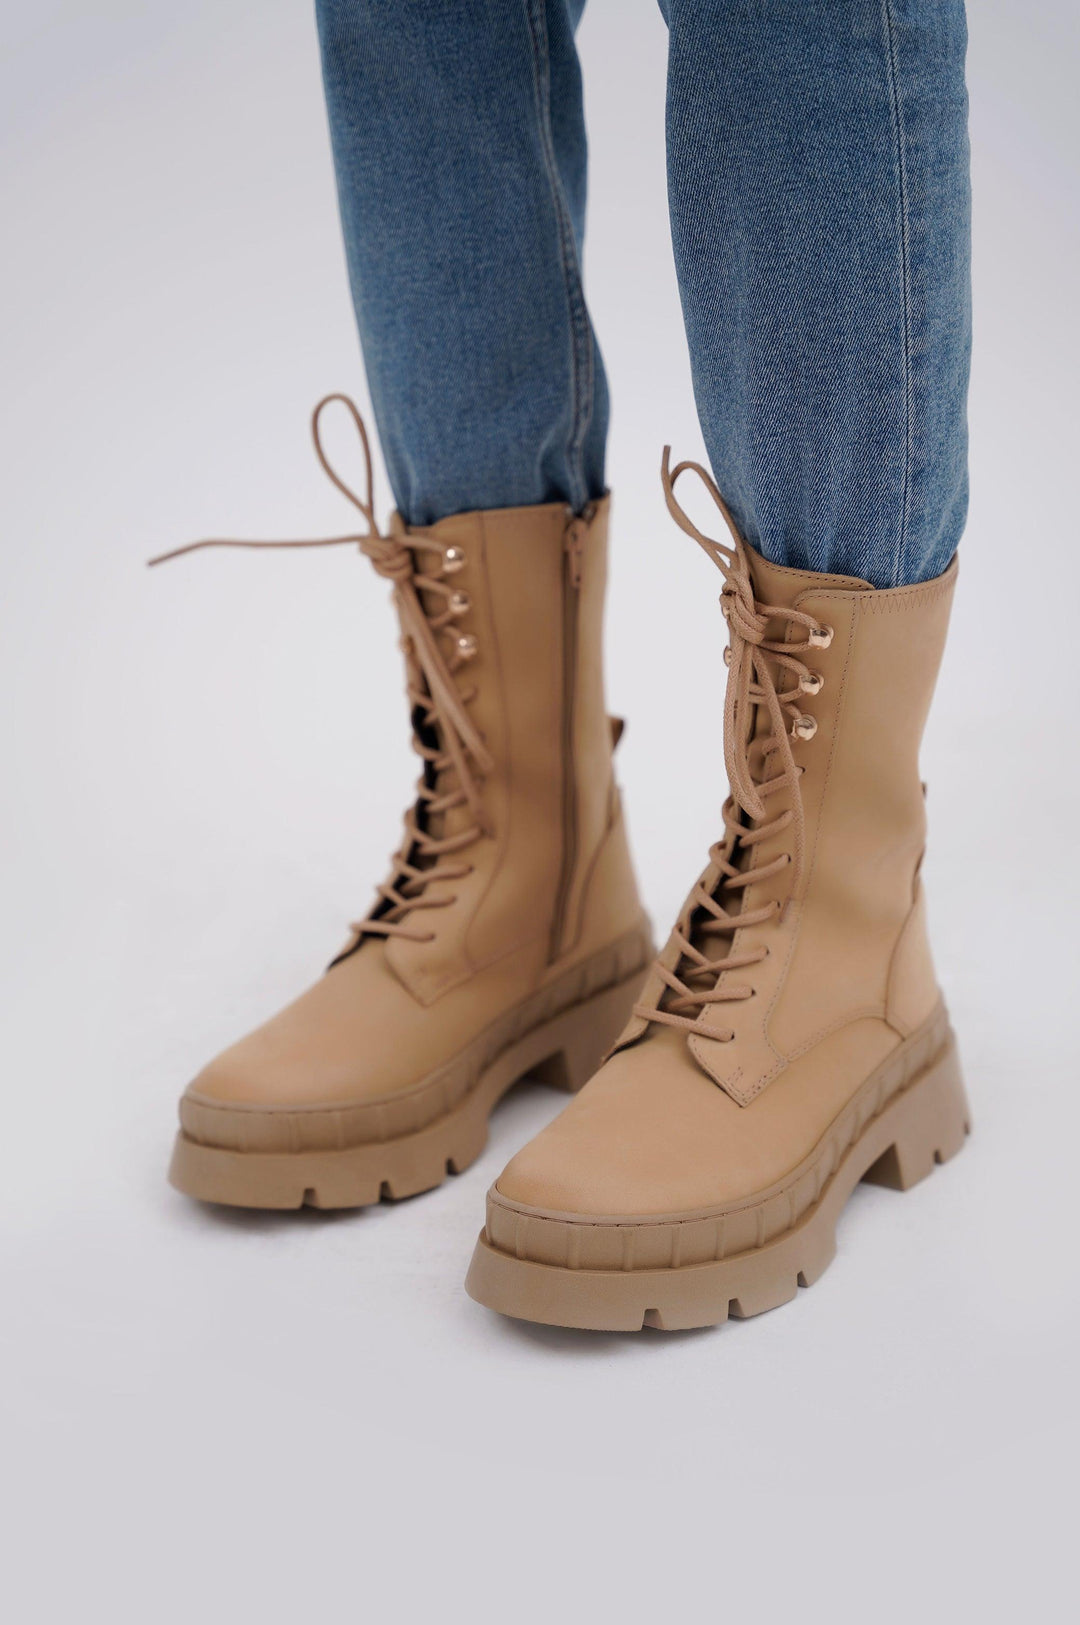 THE SUEDE COMBAT BOOTS - COMBAT BOOTS